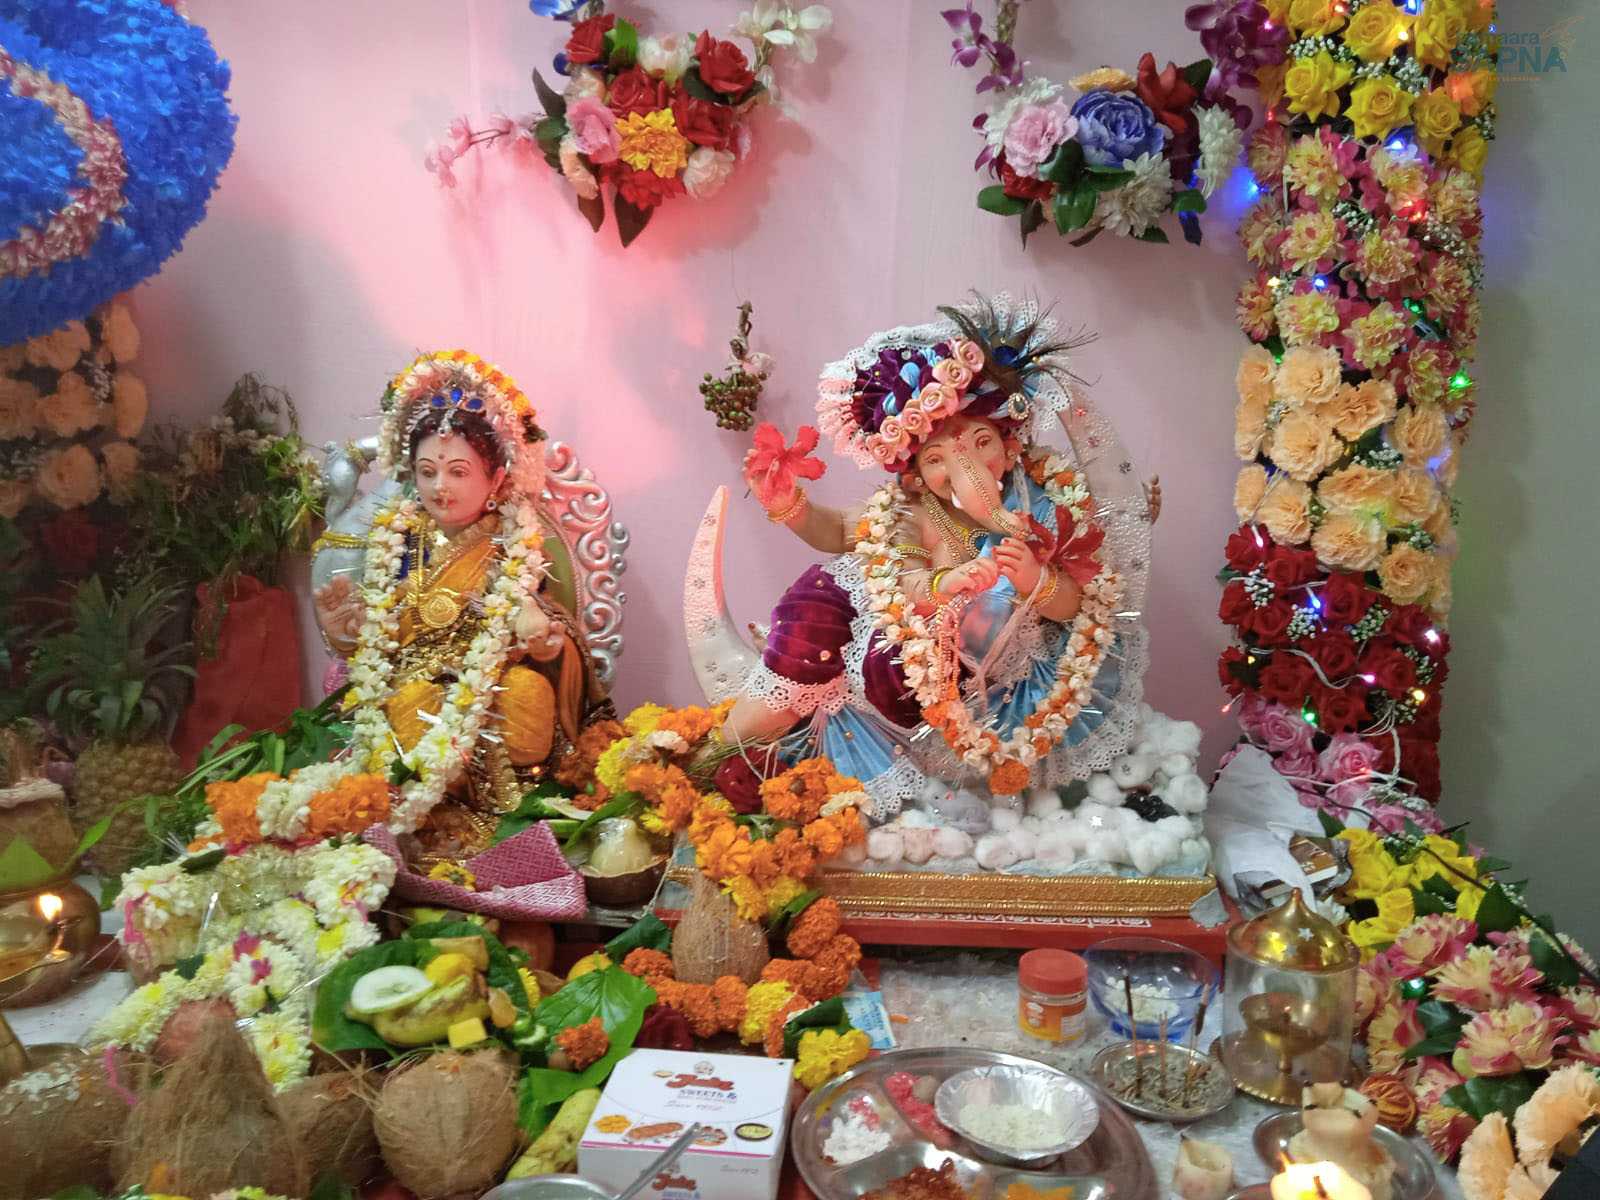 Colourful flower decorations and beautiful lights was a lovely pandal for Guari and Ganapati celebration in a beneficiary’s home.